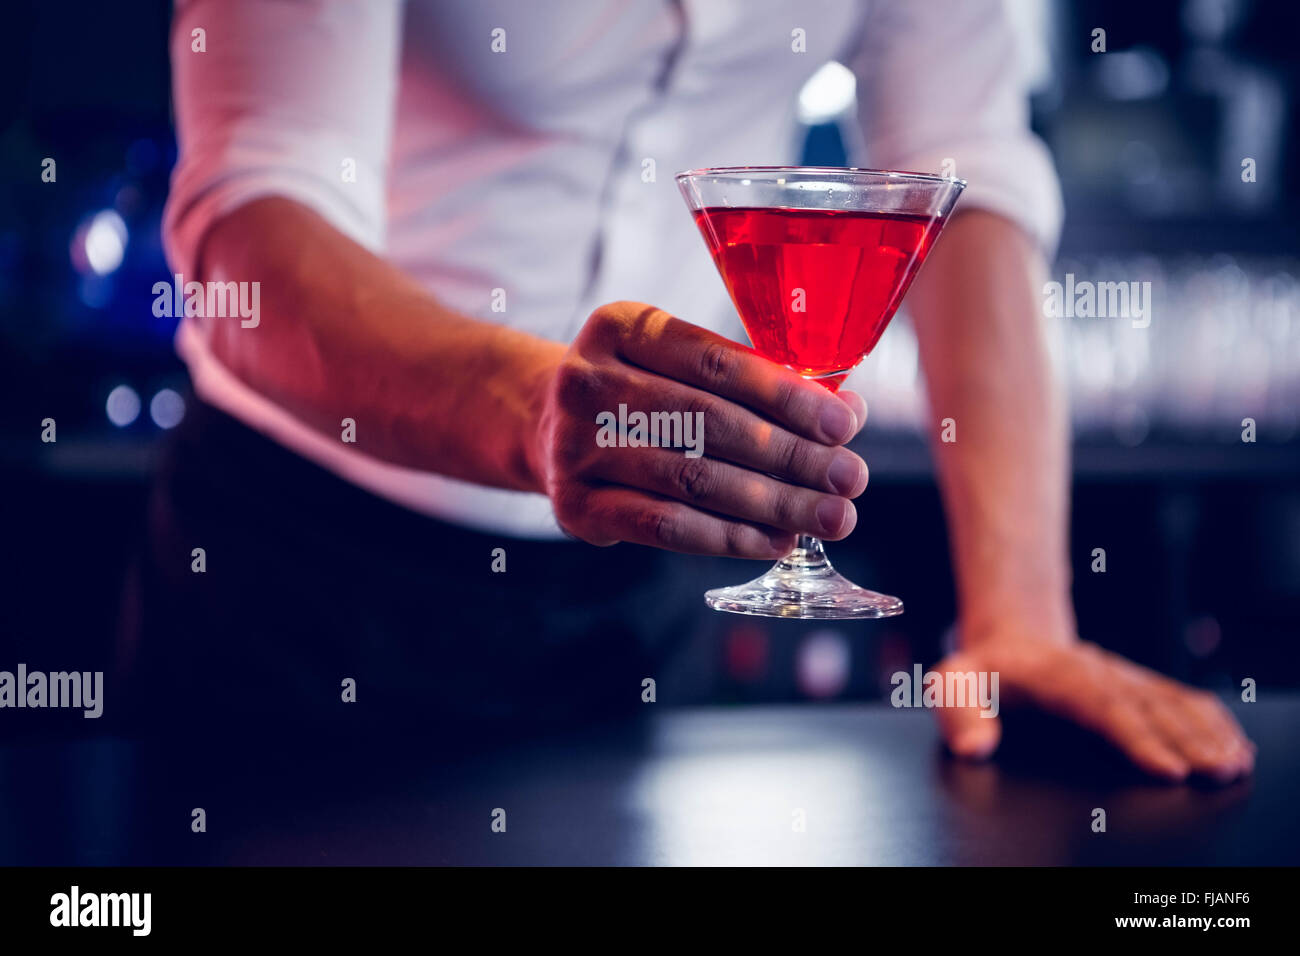 Bartender serving a red martini Stock Photo